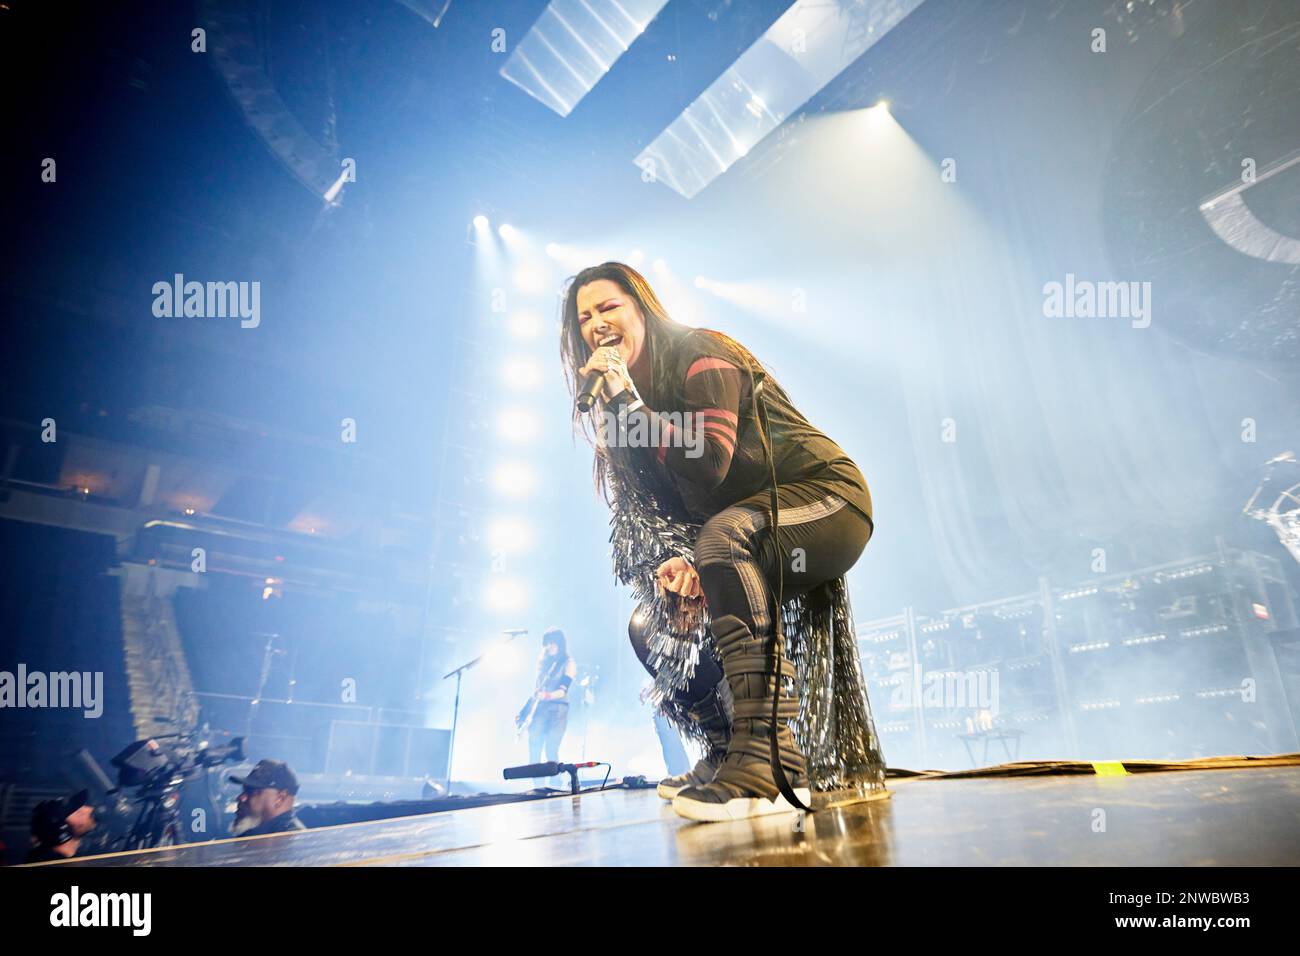 MINNEAPOLIS, MN FEBRUARY 26: Evanescence perform at Target Center in Minneapolis on February 26, 2023 in. Credit: Tony Nelson/MediaPunch Stock Photo